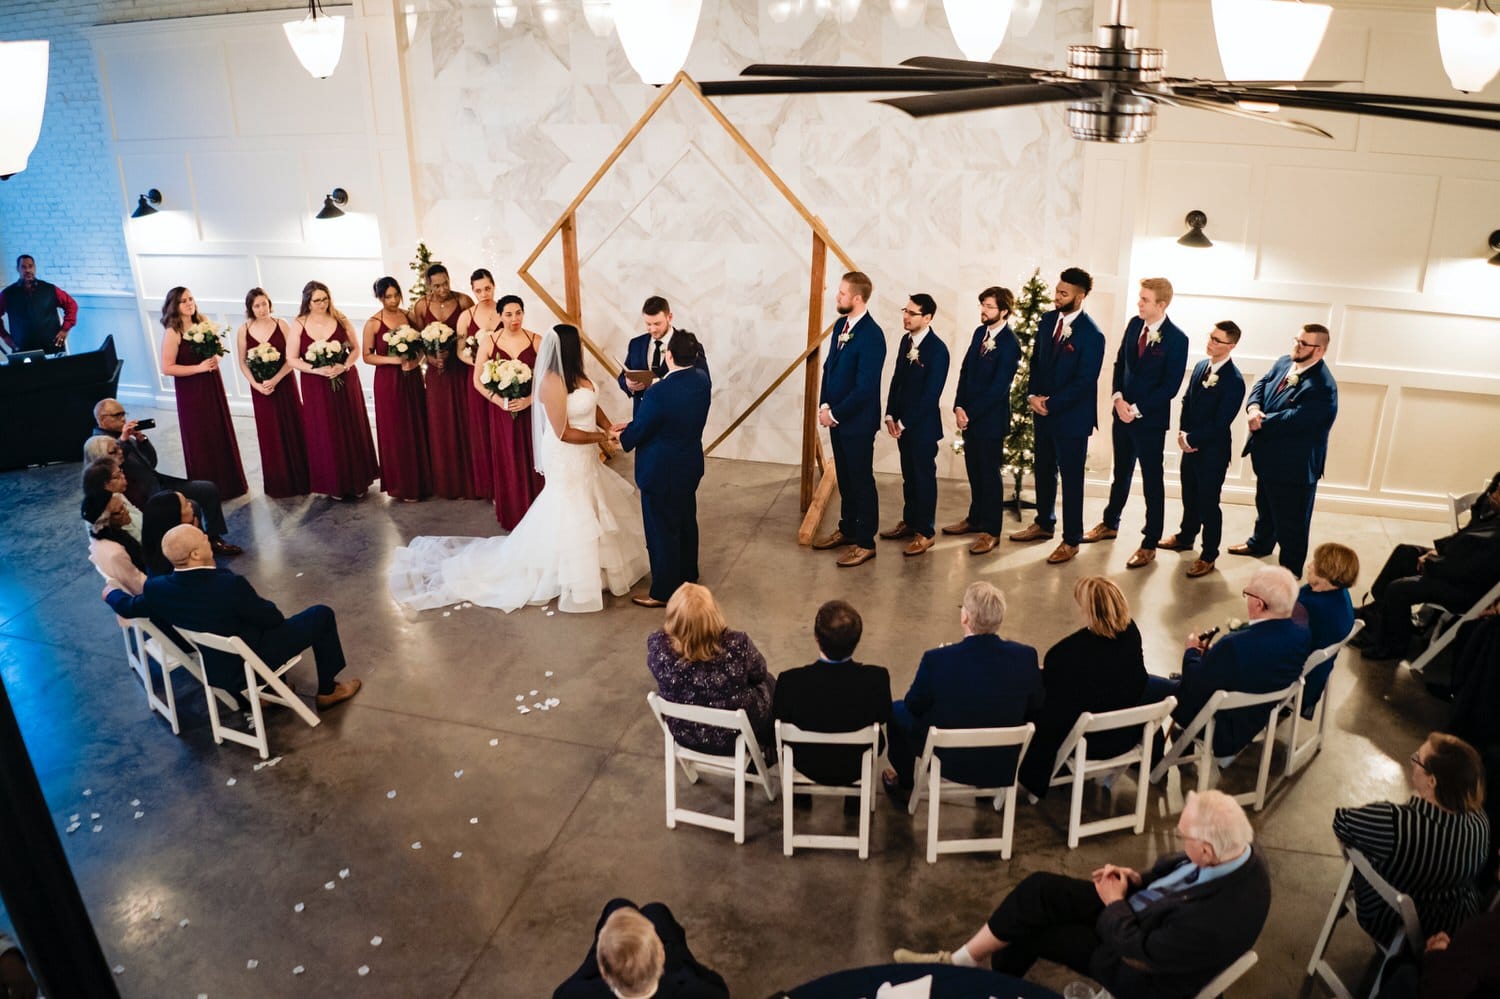 A colorful, candid picture taken from above of a bride and groom exchanging their vows as their family and friends watch-on during a winter wedding at The Station in Kansas City. 